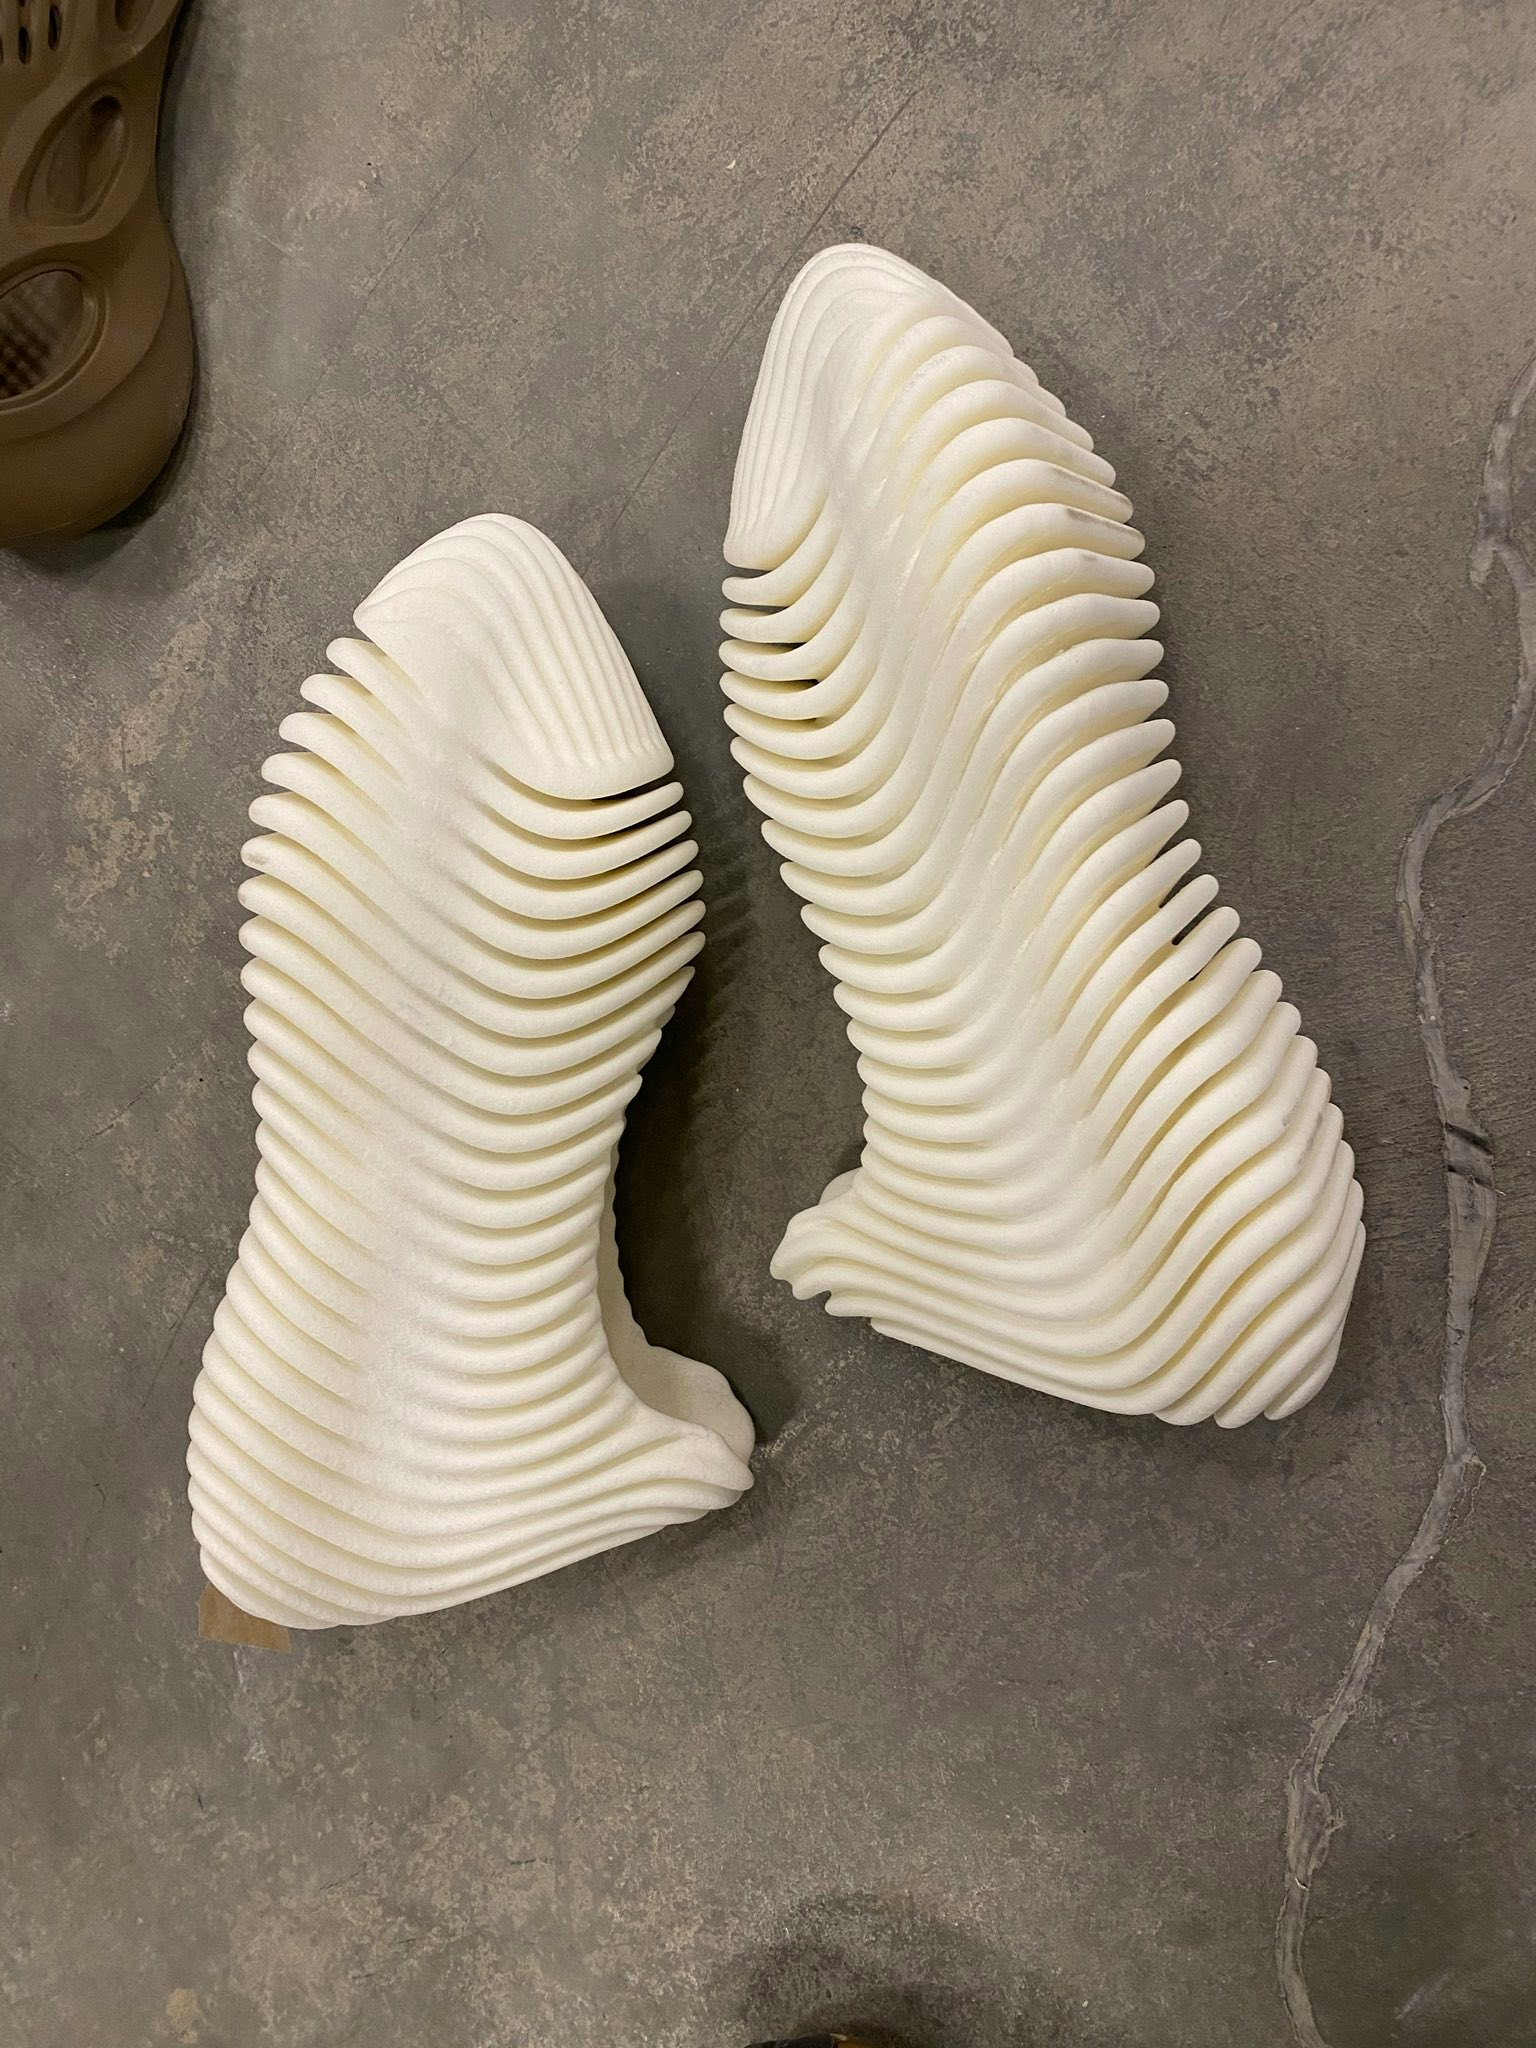 Kanye West teases his wildest Yeezy 